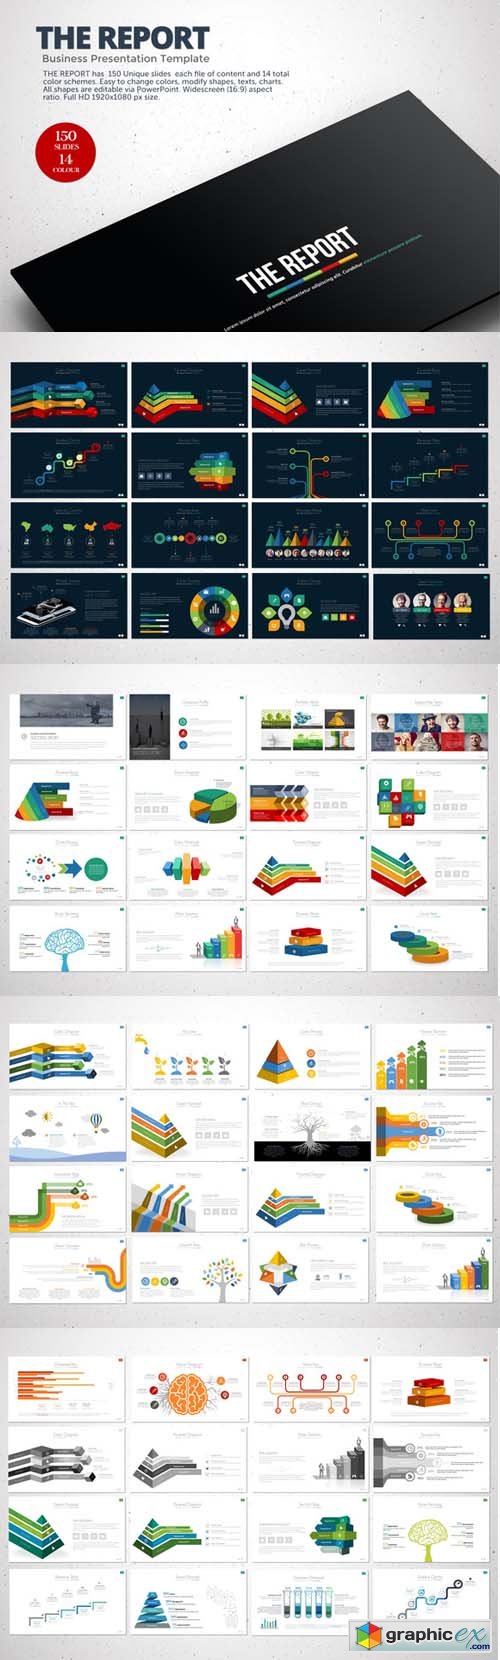 The Report Powerpoint Template